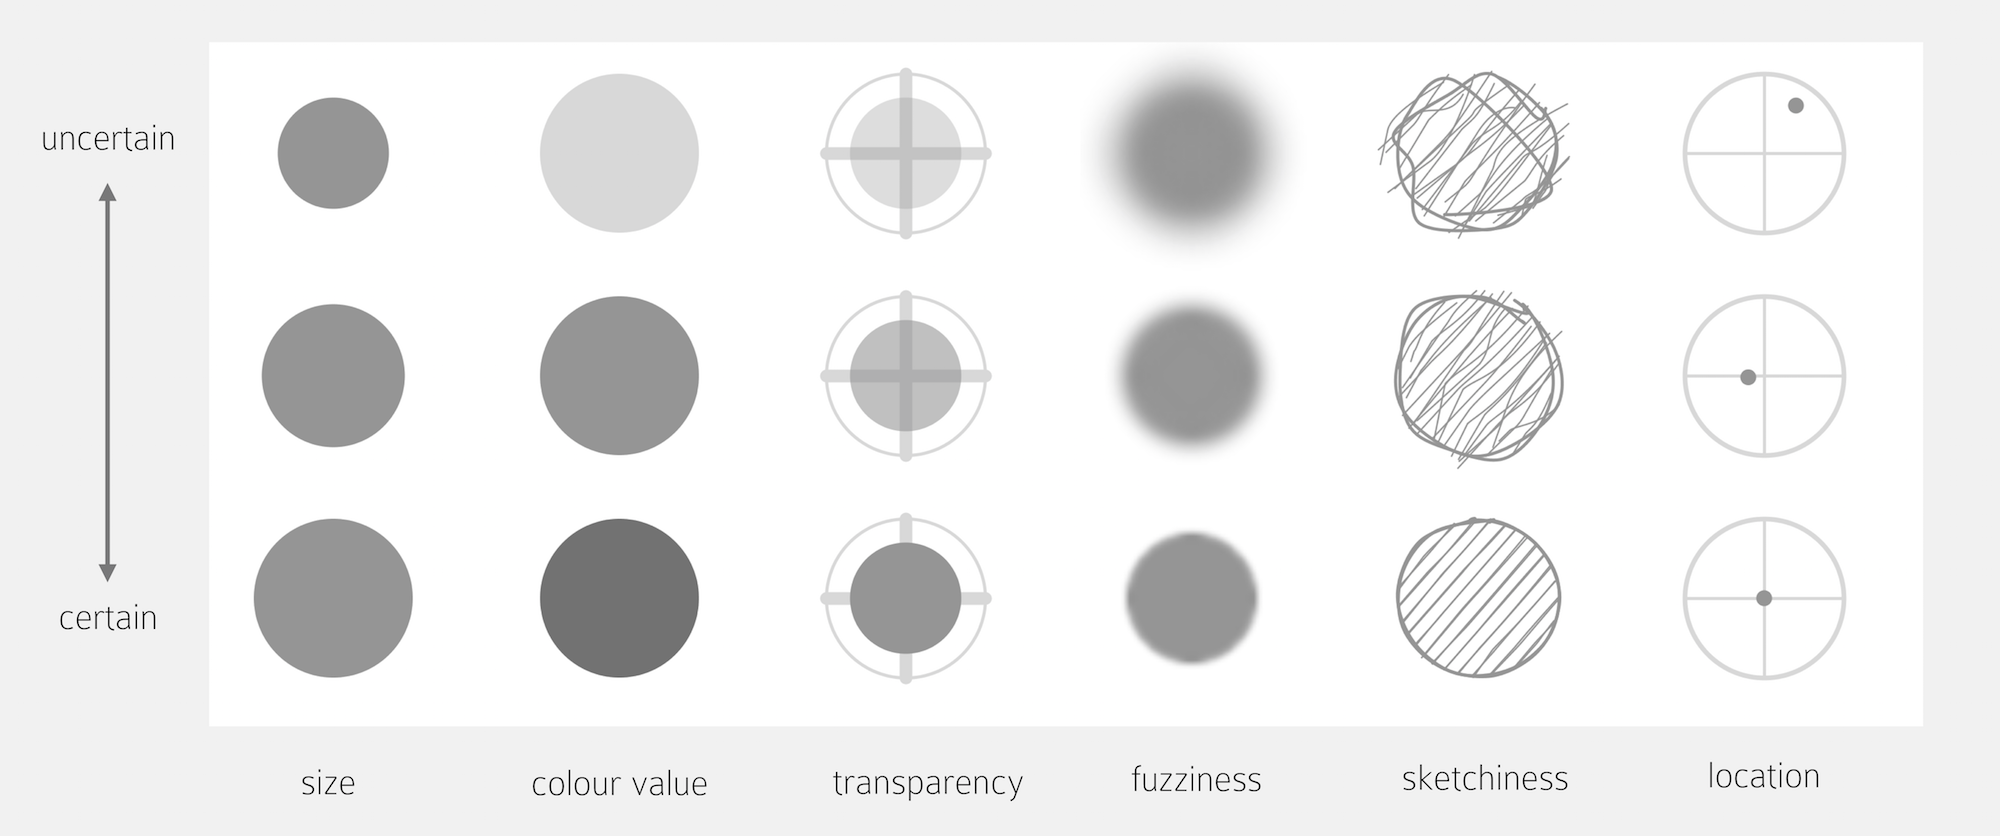 Visual variables that can be used to represent levels of uncertainty information.